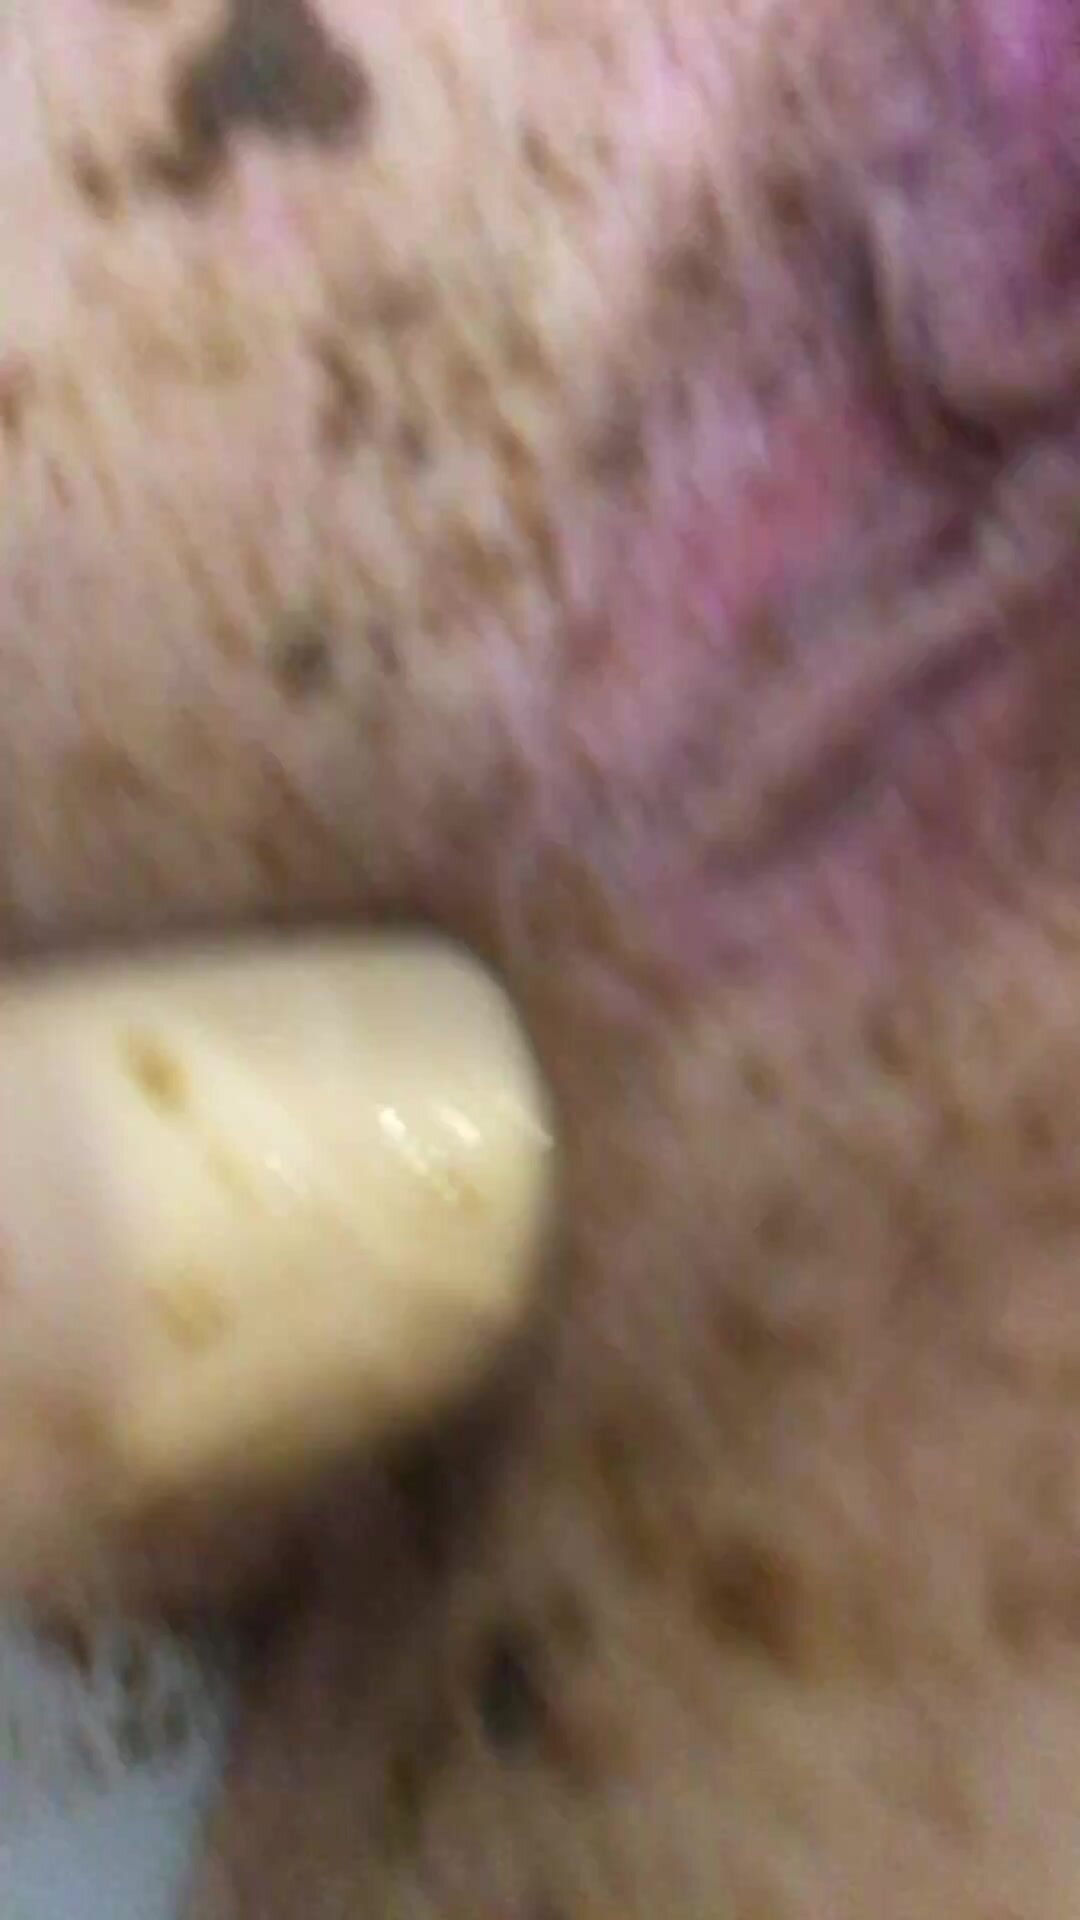 Shitty fuck in tight ass to tight pussy